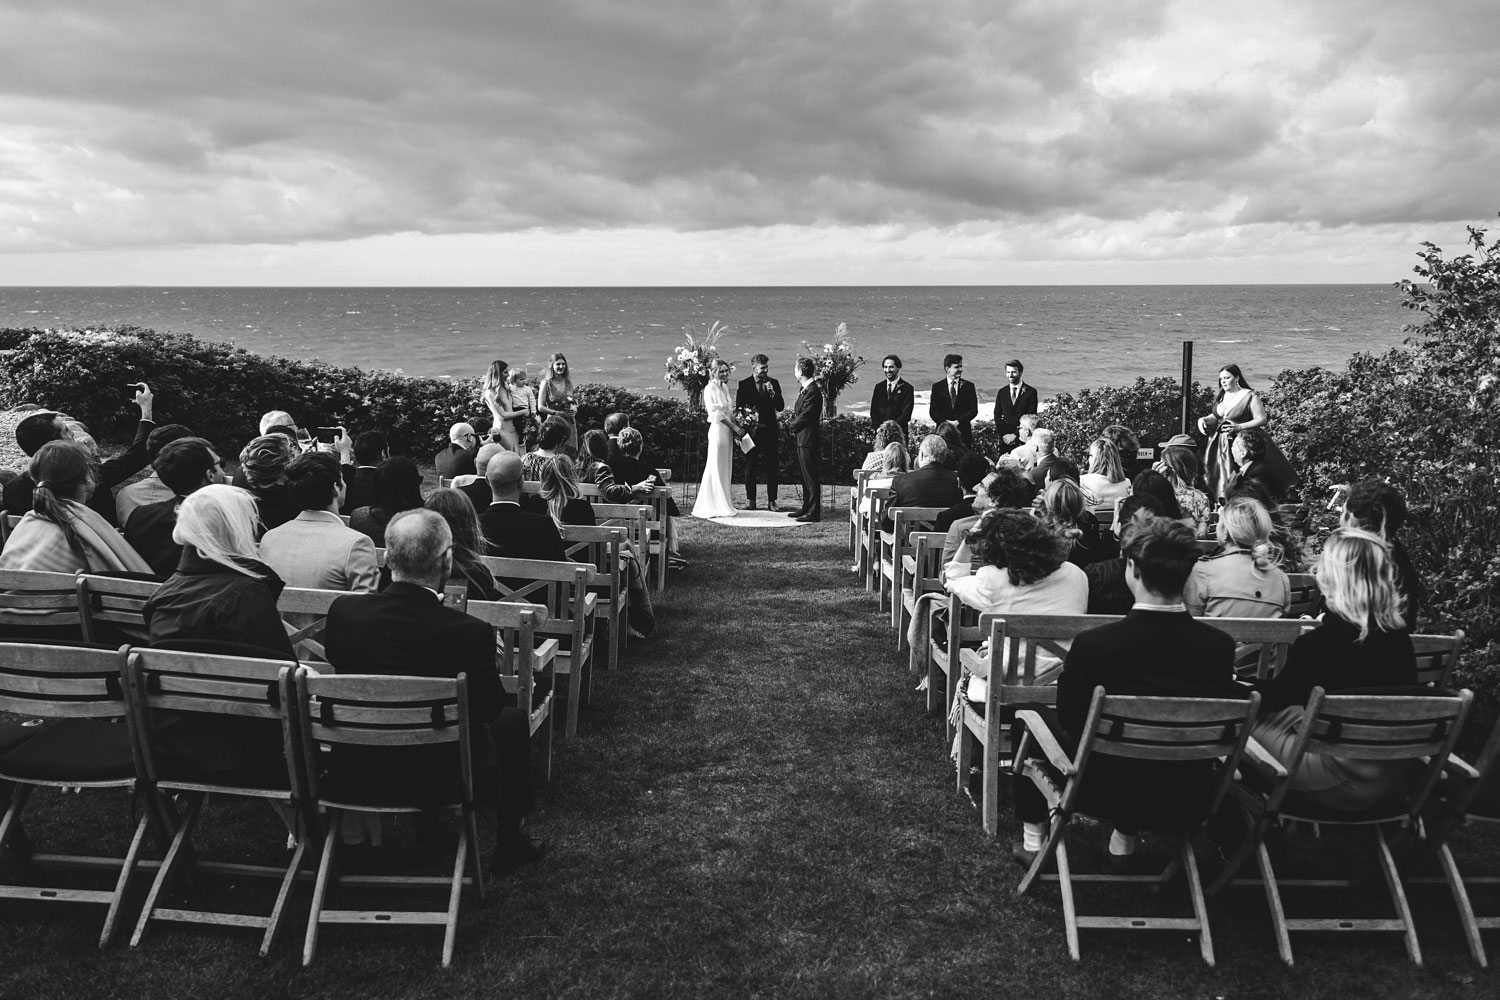 Seaside serenity at the open-air ceremony at Helenekilde Hotel, with the vast sea as a stunning backdrop